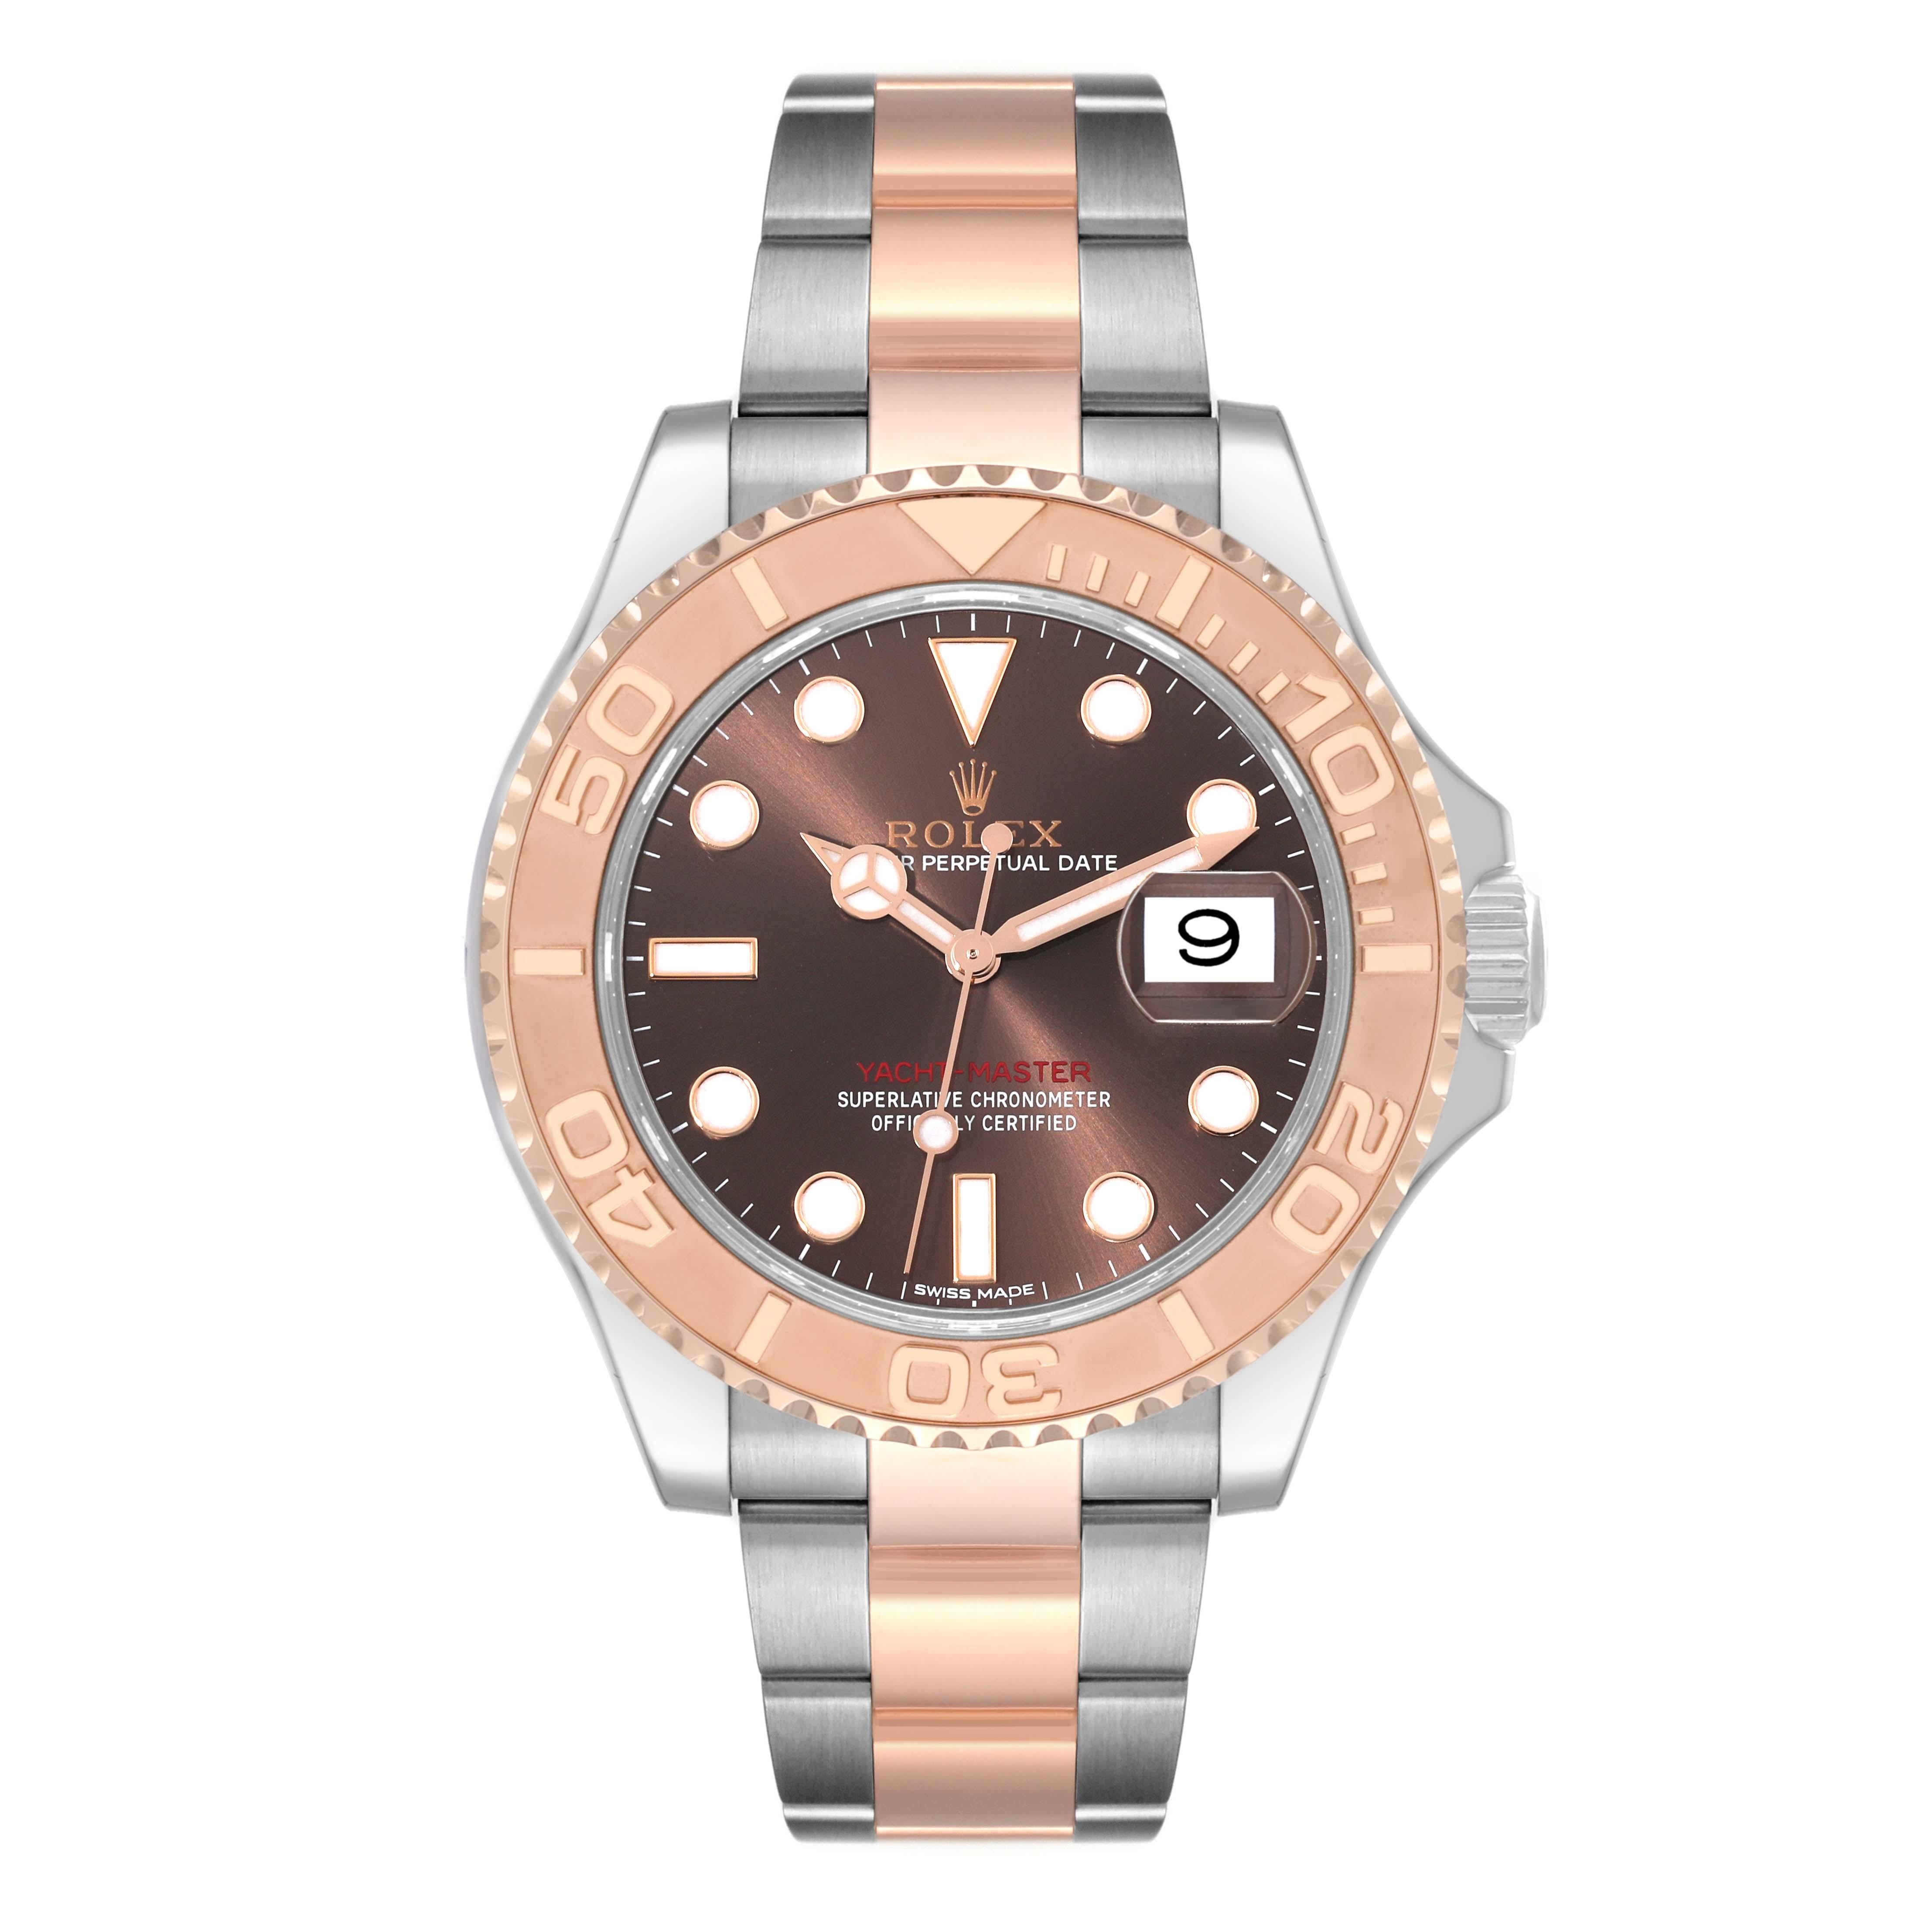 Rolex Yachtmaster 40 Rose Gold Steel Brown Dial Mens Watch 116621. Officially certified chronometer self-winding movement. Stainless steel case 40 mm in diameter. Rolex logo on a crown. 18k rose gold special time-lapse bidirectional rotating bezel.